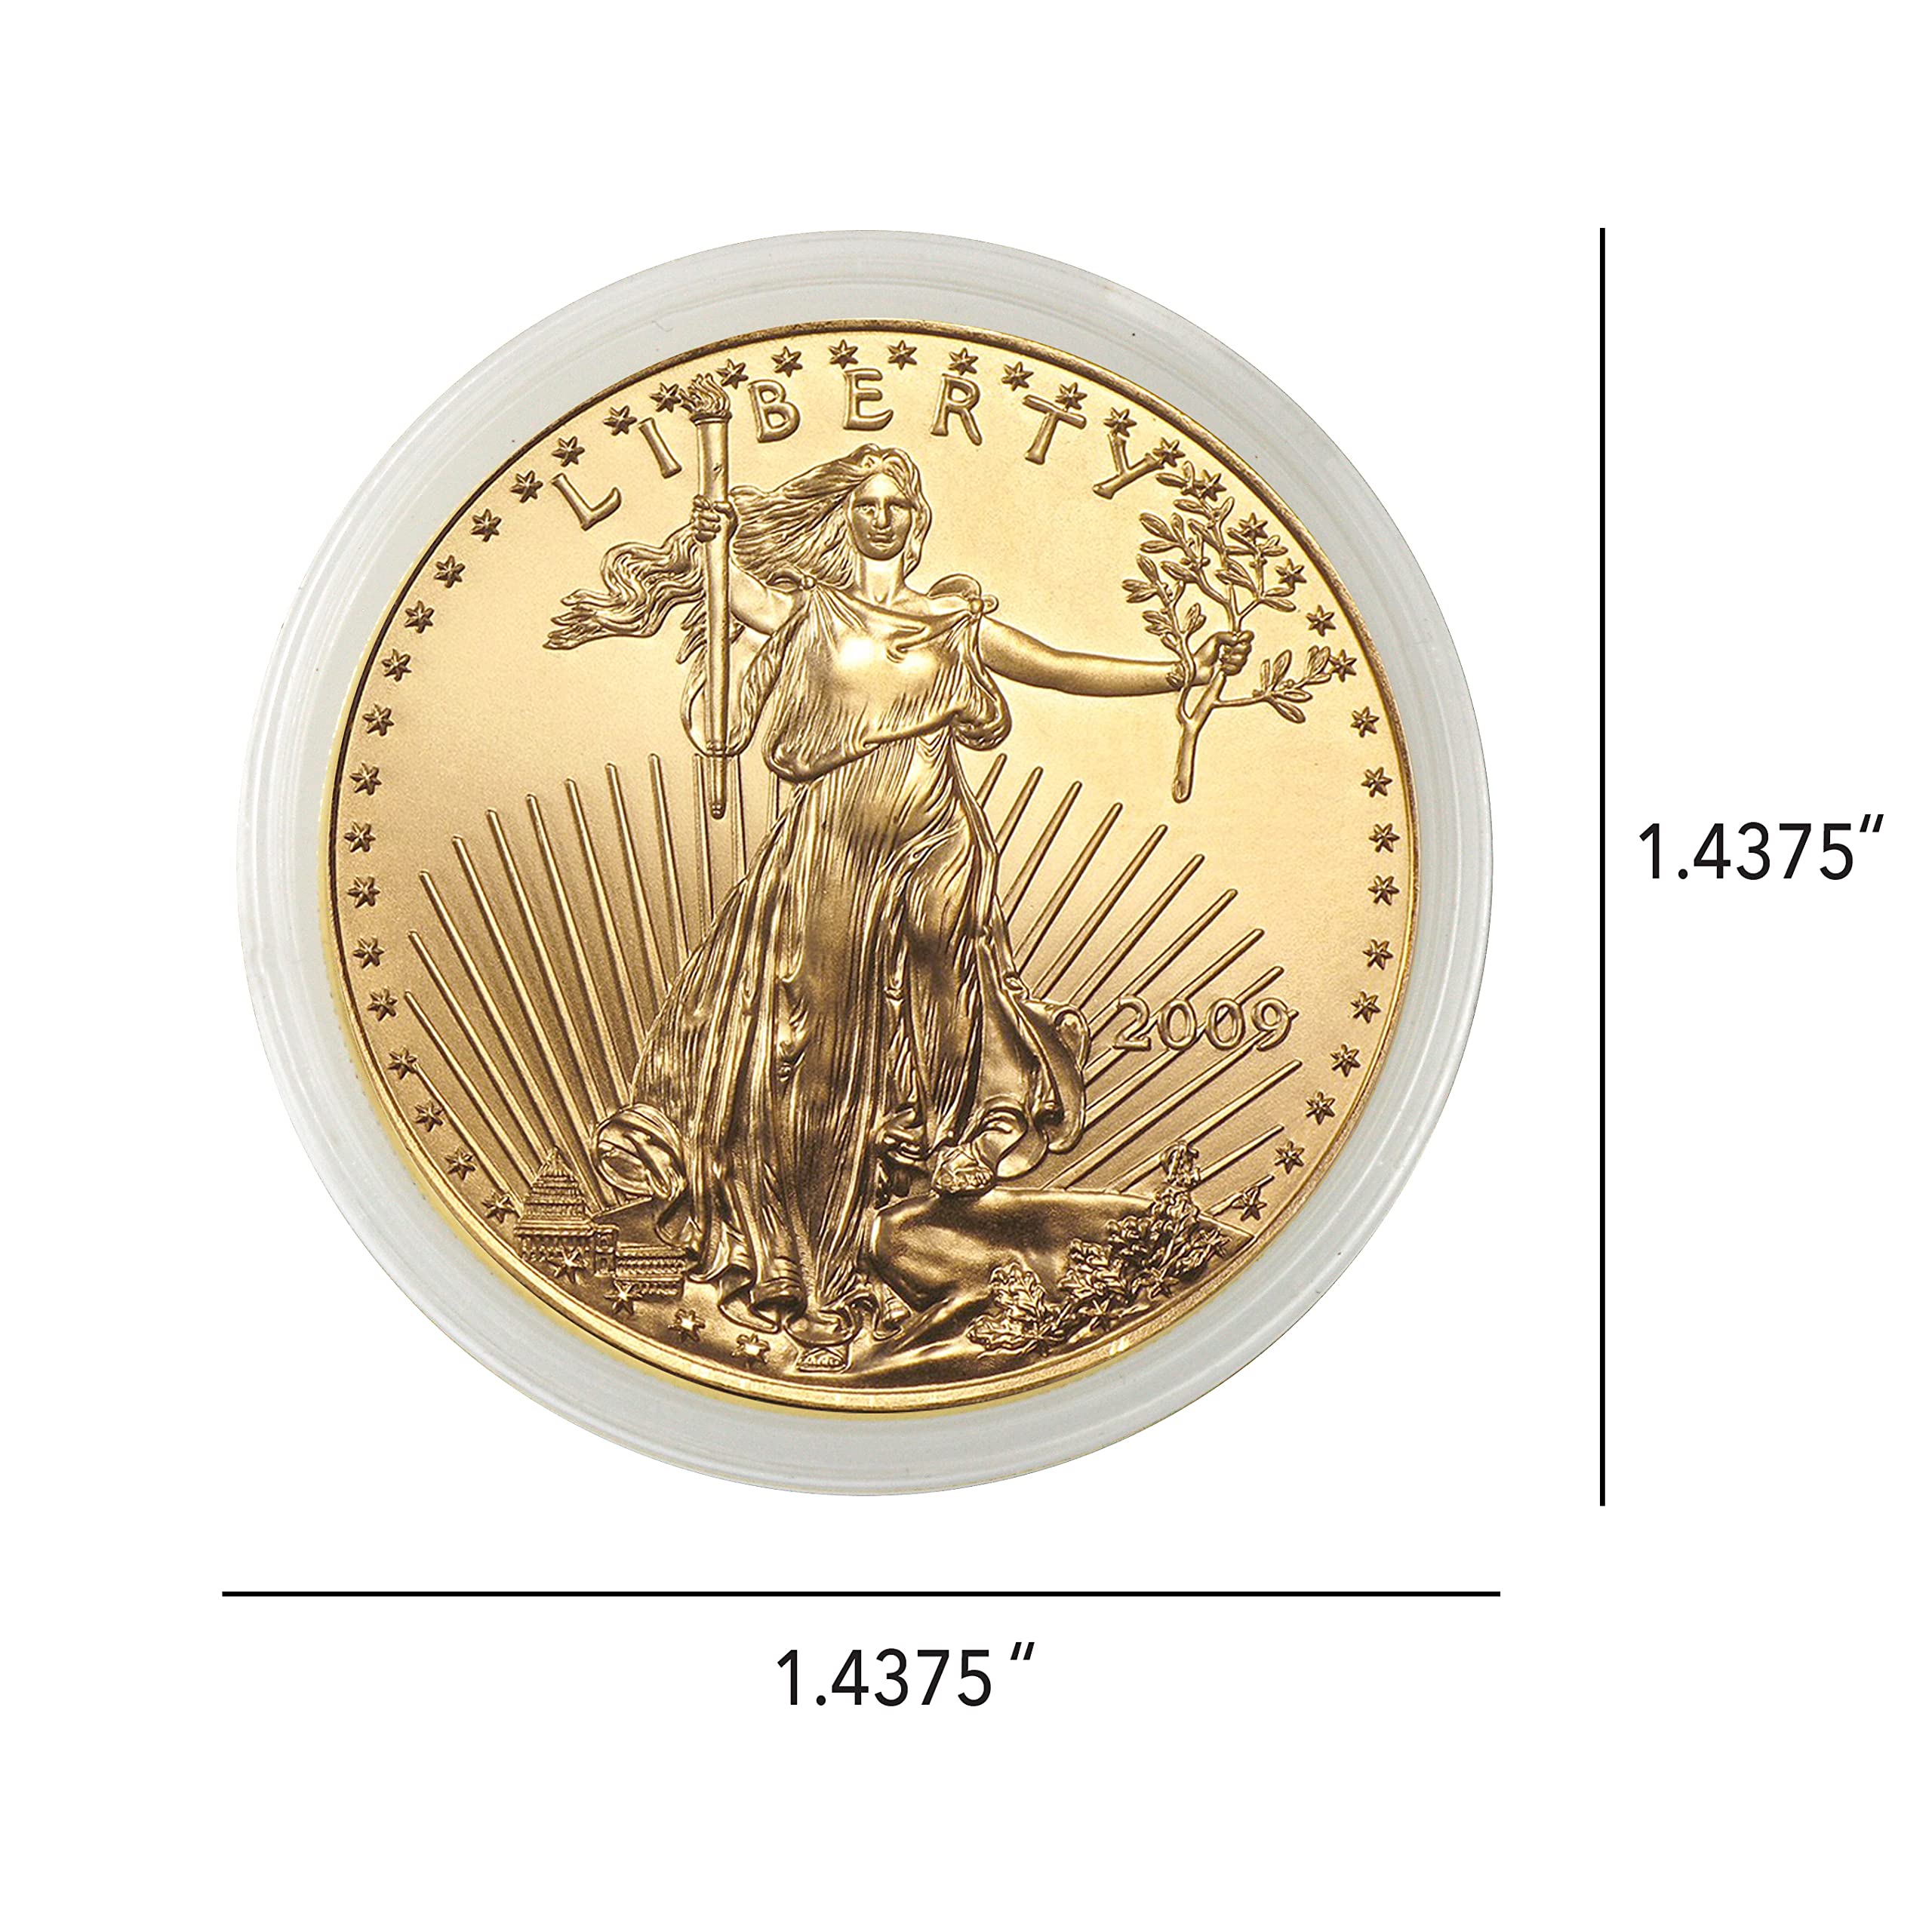 2009 W $50 Gold American Eagle $50 American Mint State